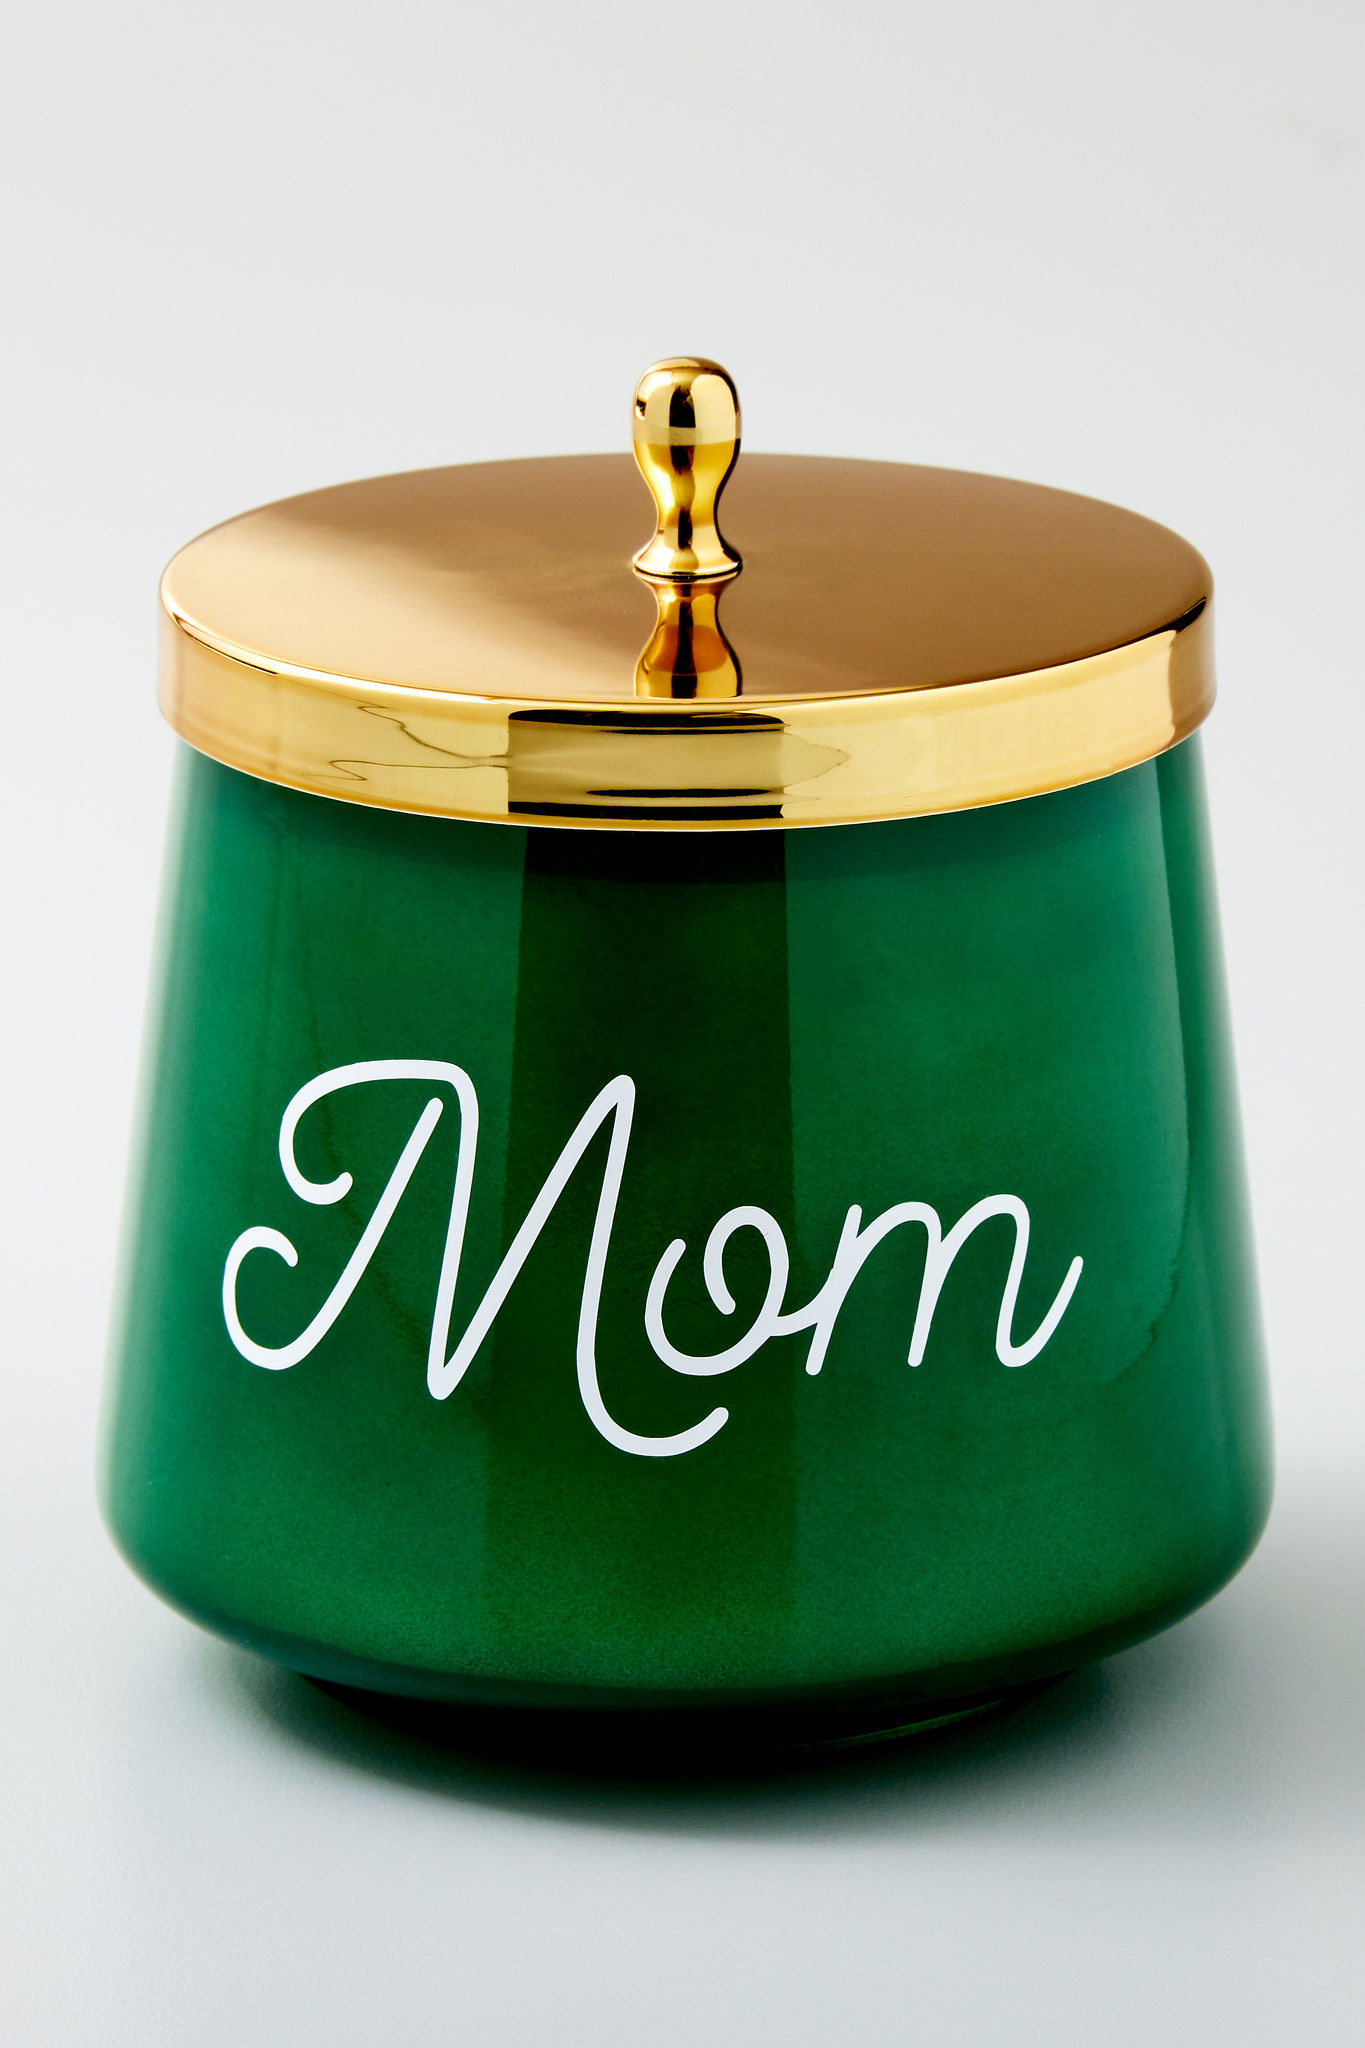 Project cuts vinyl to create a mother's day candle 